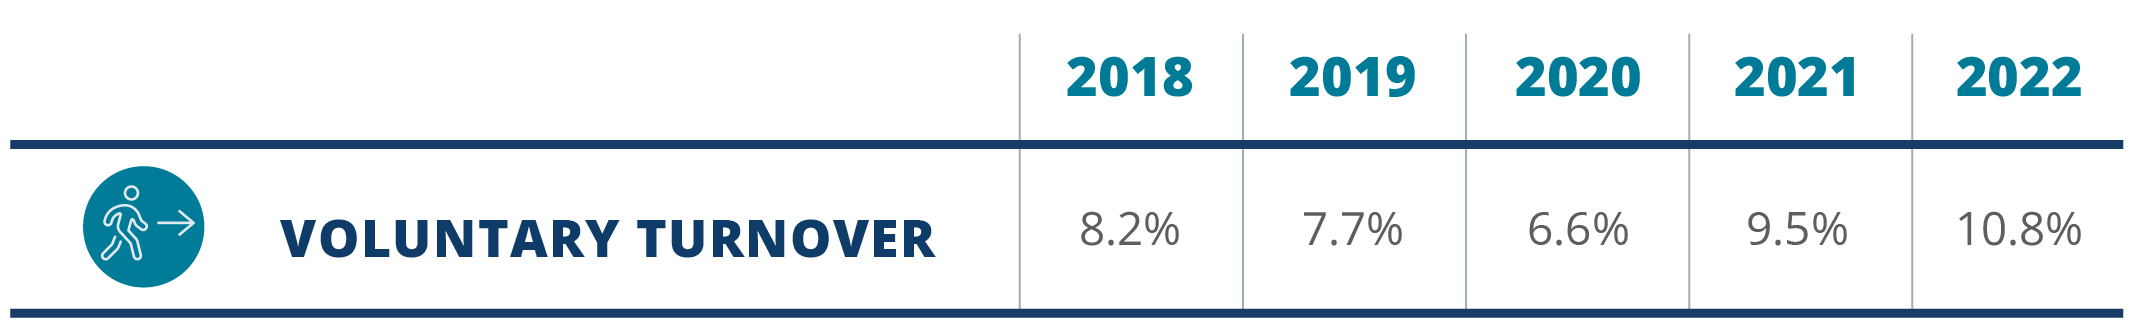 Chart of employee voluntary turnover from 2018 through 2022